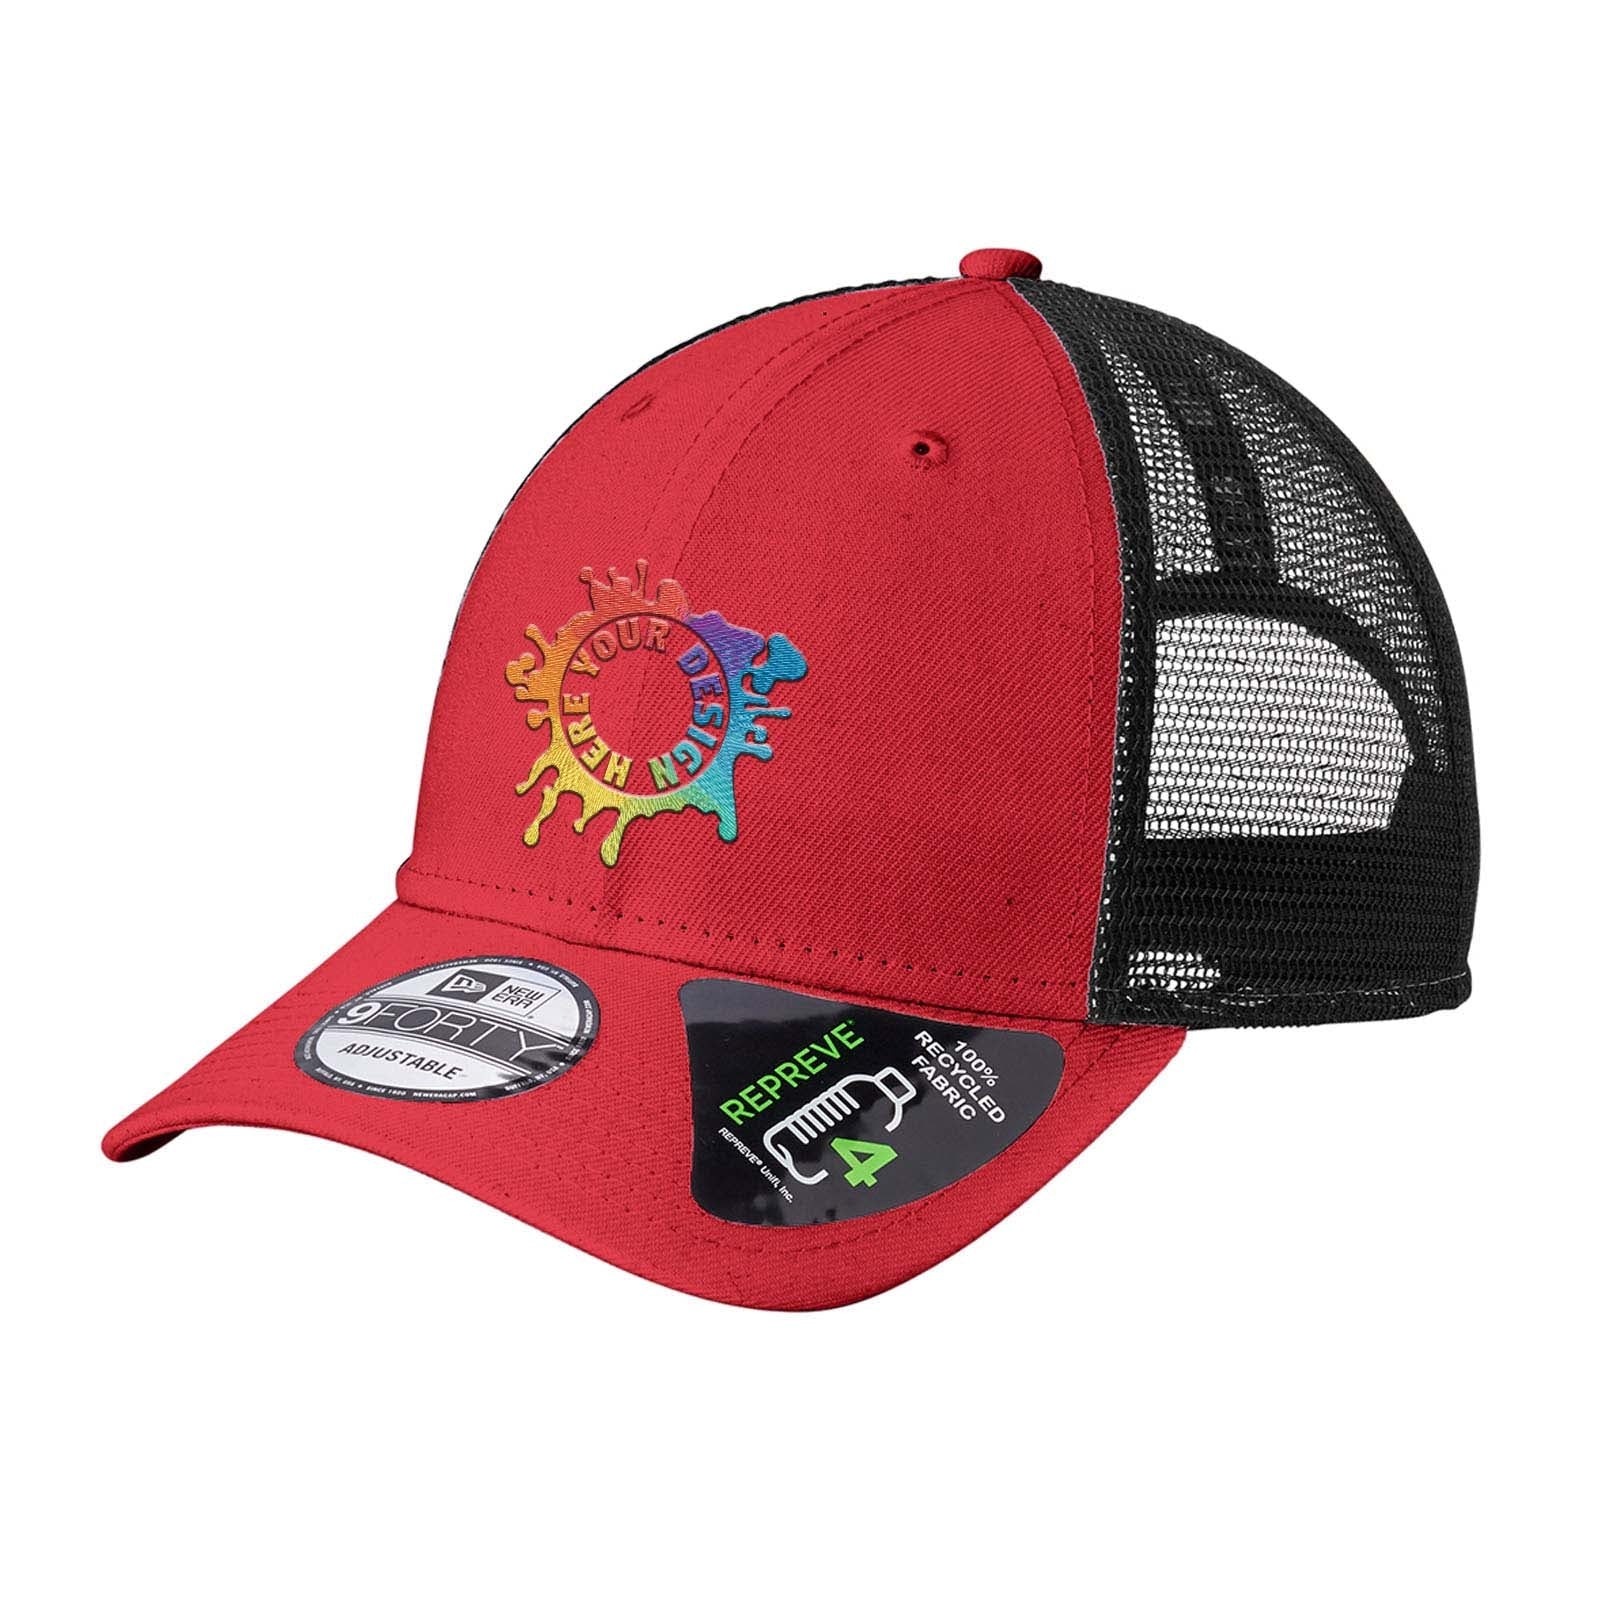 Embroidered New Era® Recycled Snapback Cap - Mato & Hash